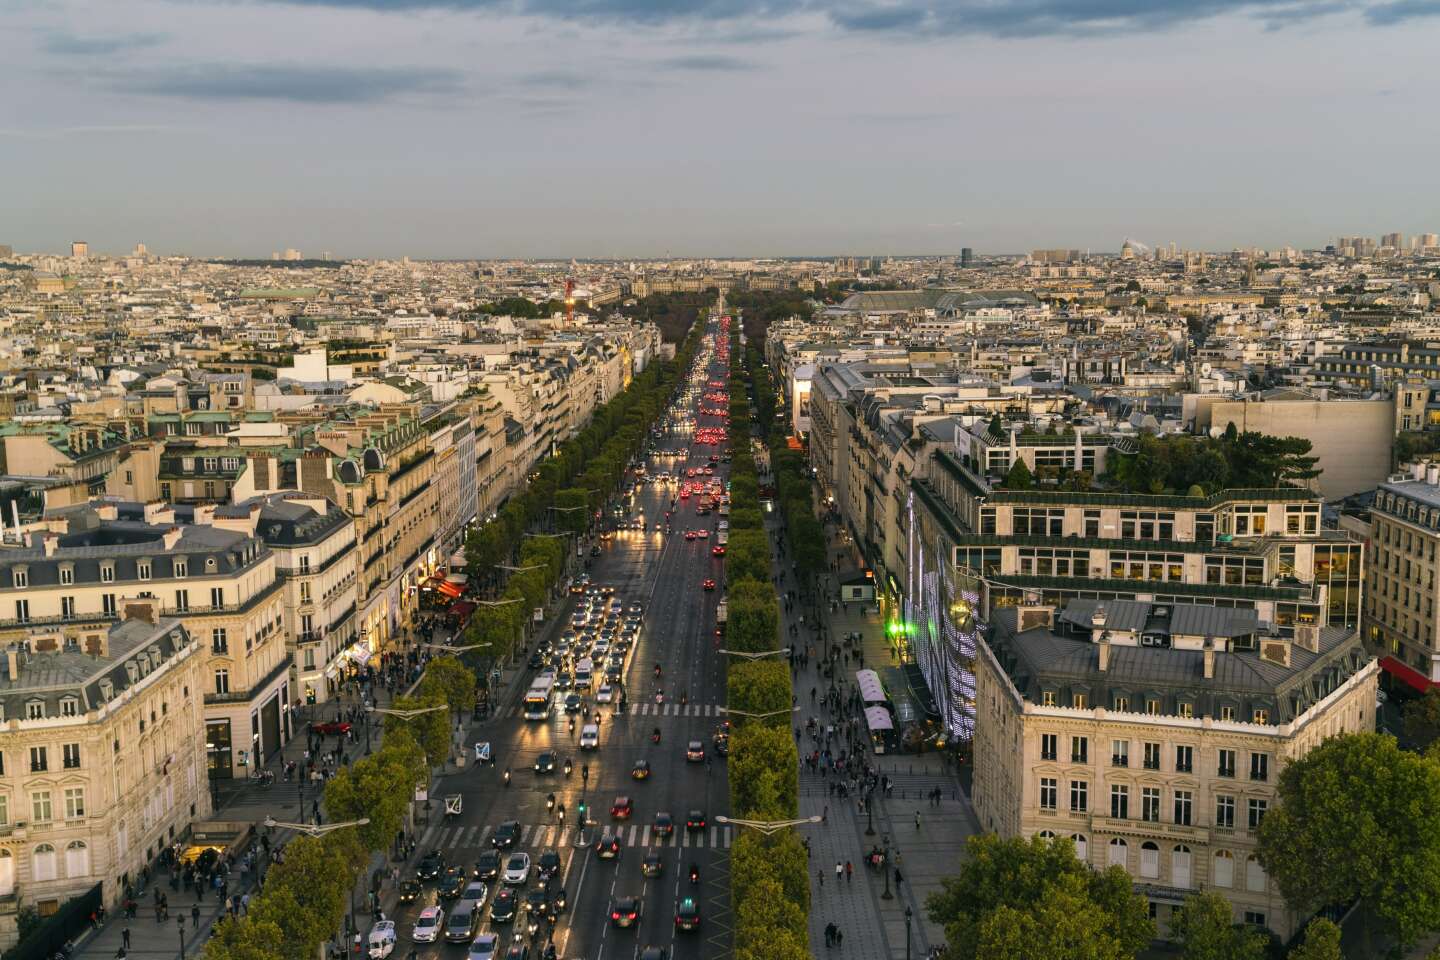 champs elysees street view